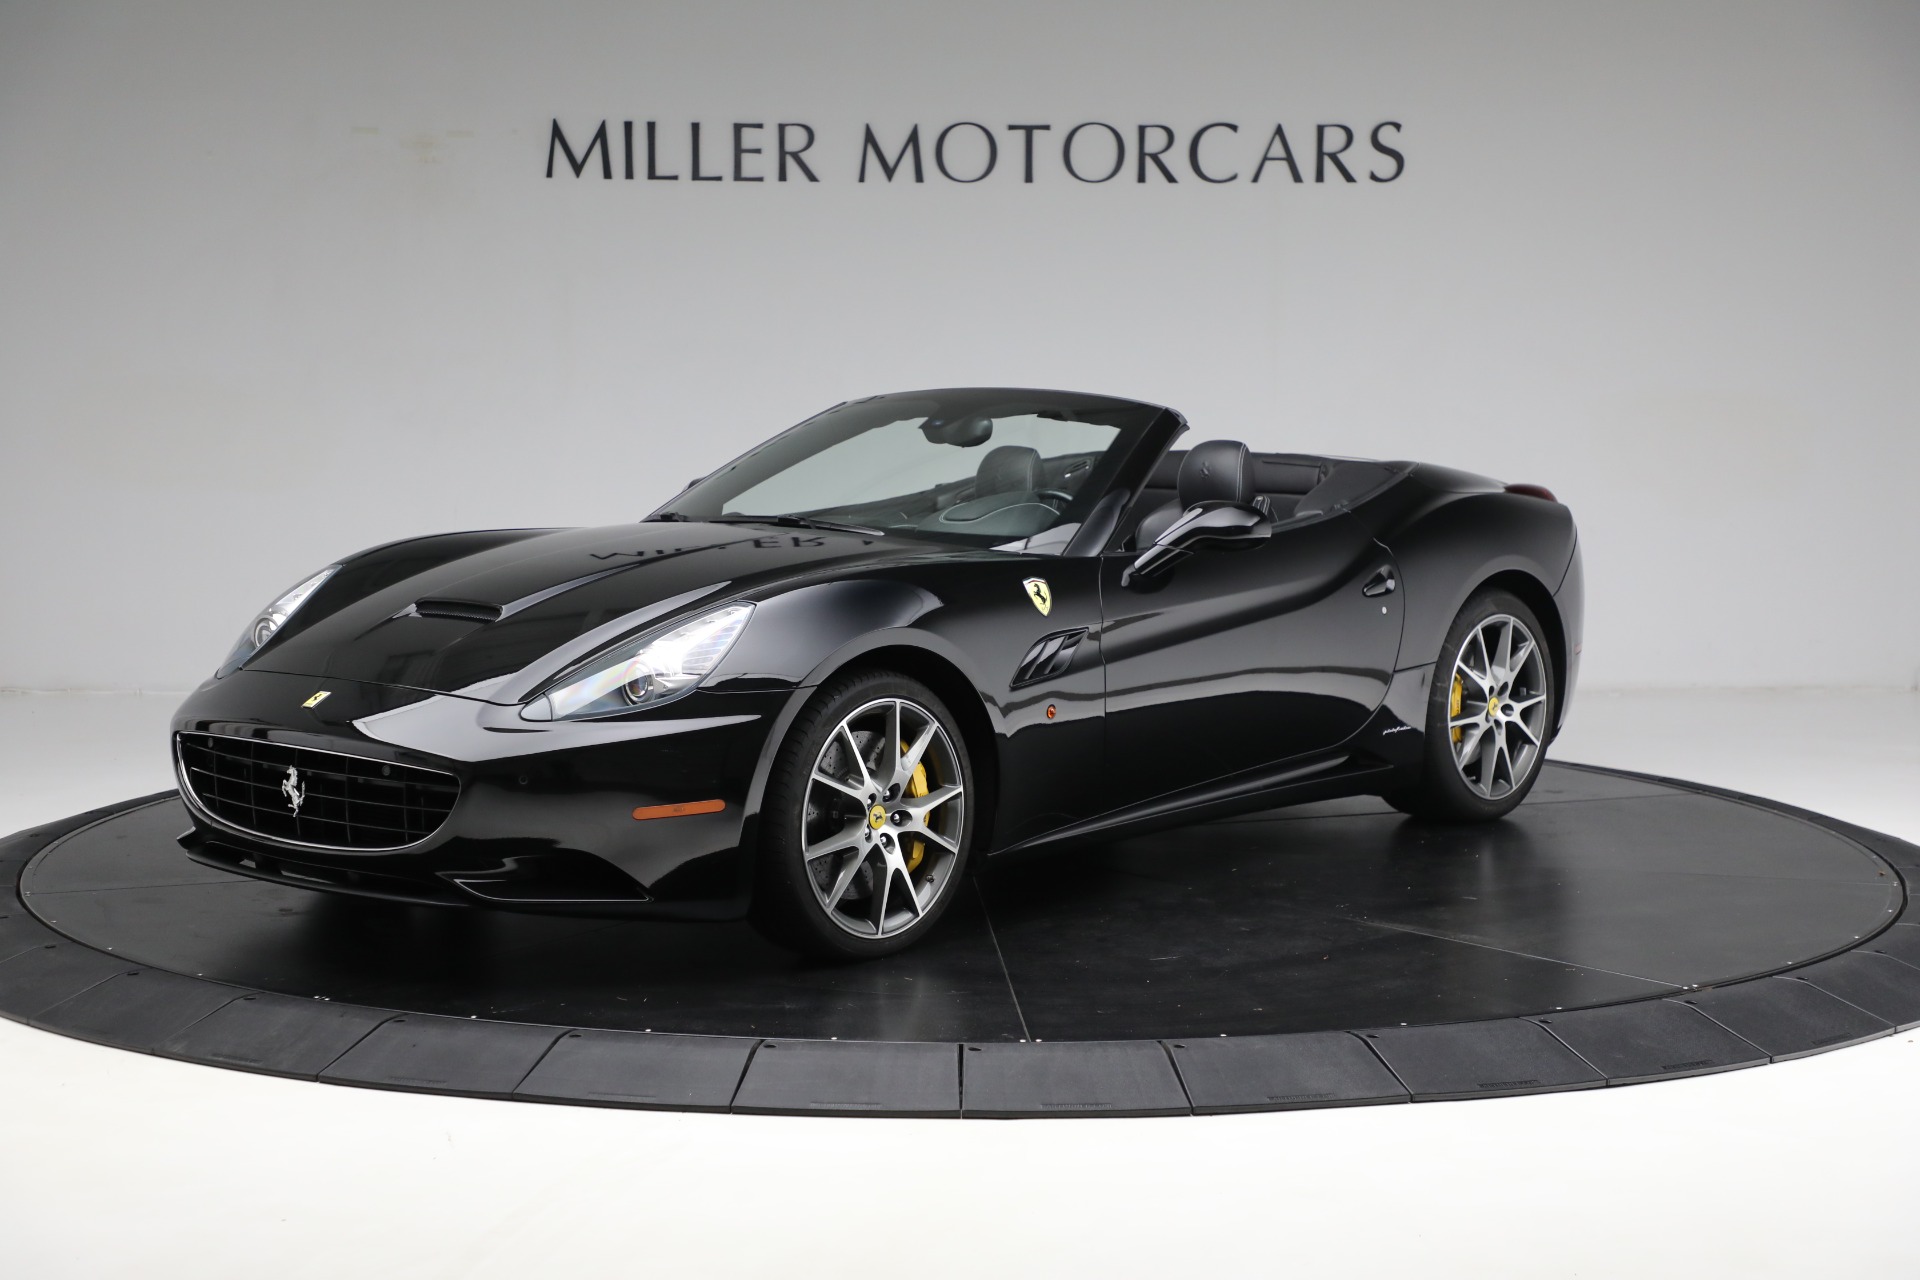 Used 2010 Ferrari California for sale Sold at Bentley Greenwich in Greenwich CT 06830 1